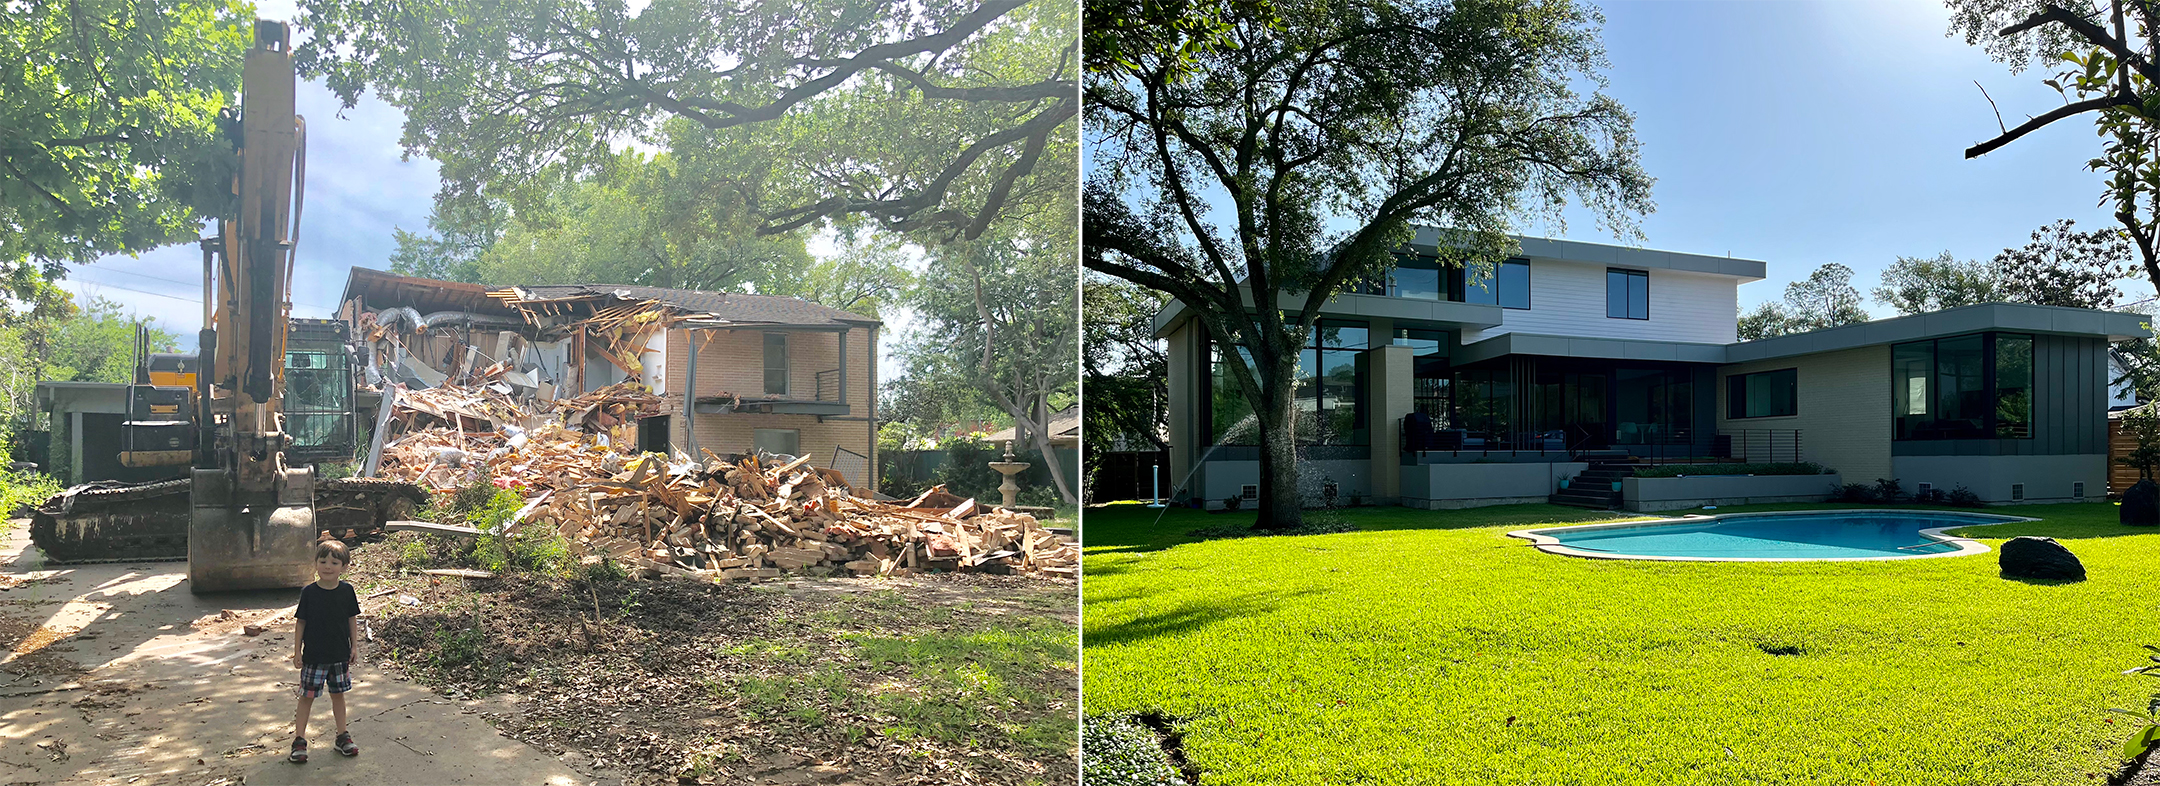 Photo of a construction vehicle next to a demolished home on the left, and on the right a two-story home with an in-ground swimming pool and green yard.